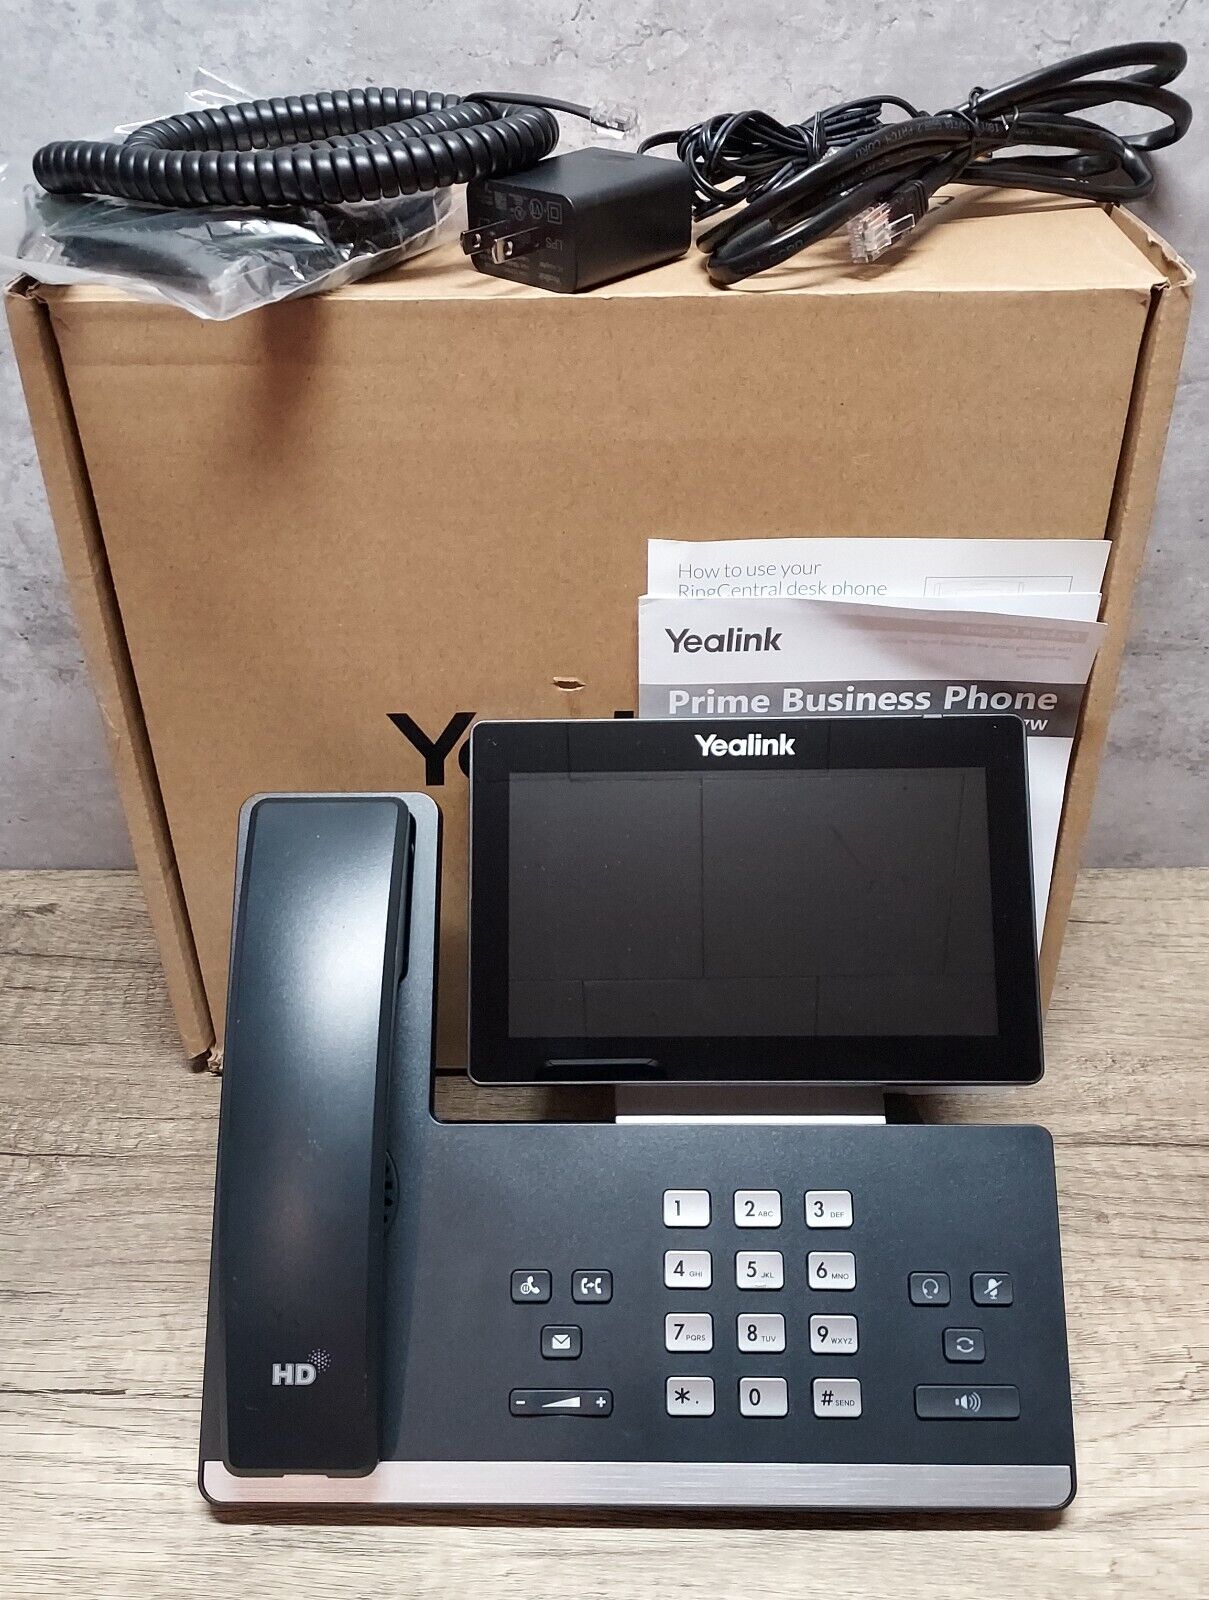 New Yealink SIP-T57W Prime Business Phone